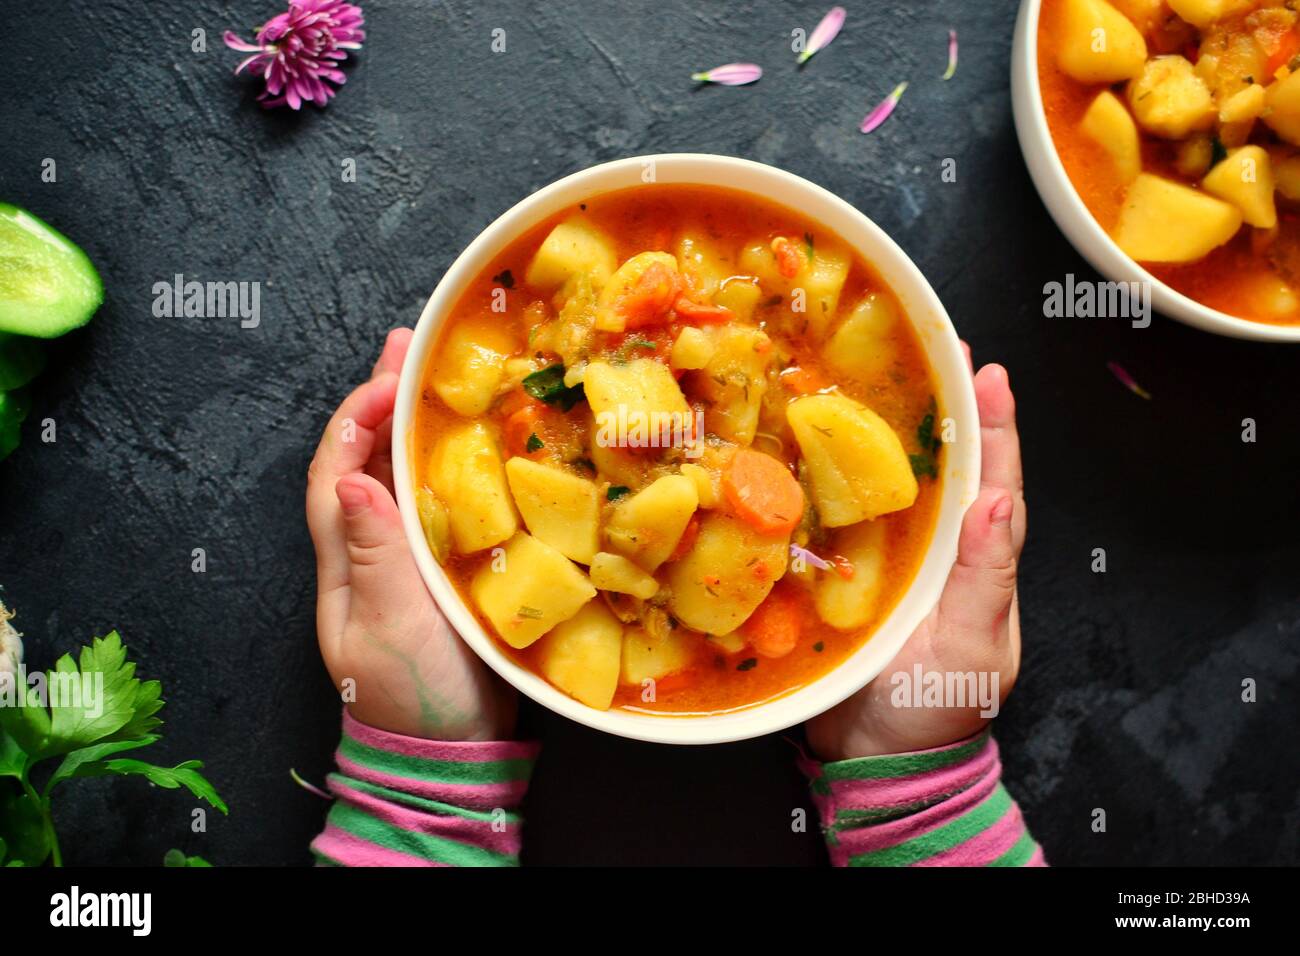 Photo of food on a dark background. Children's hands and food. The child holds hands a bowl with vegetable stew. Baby is having lunch. Food on a Stock Photo